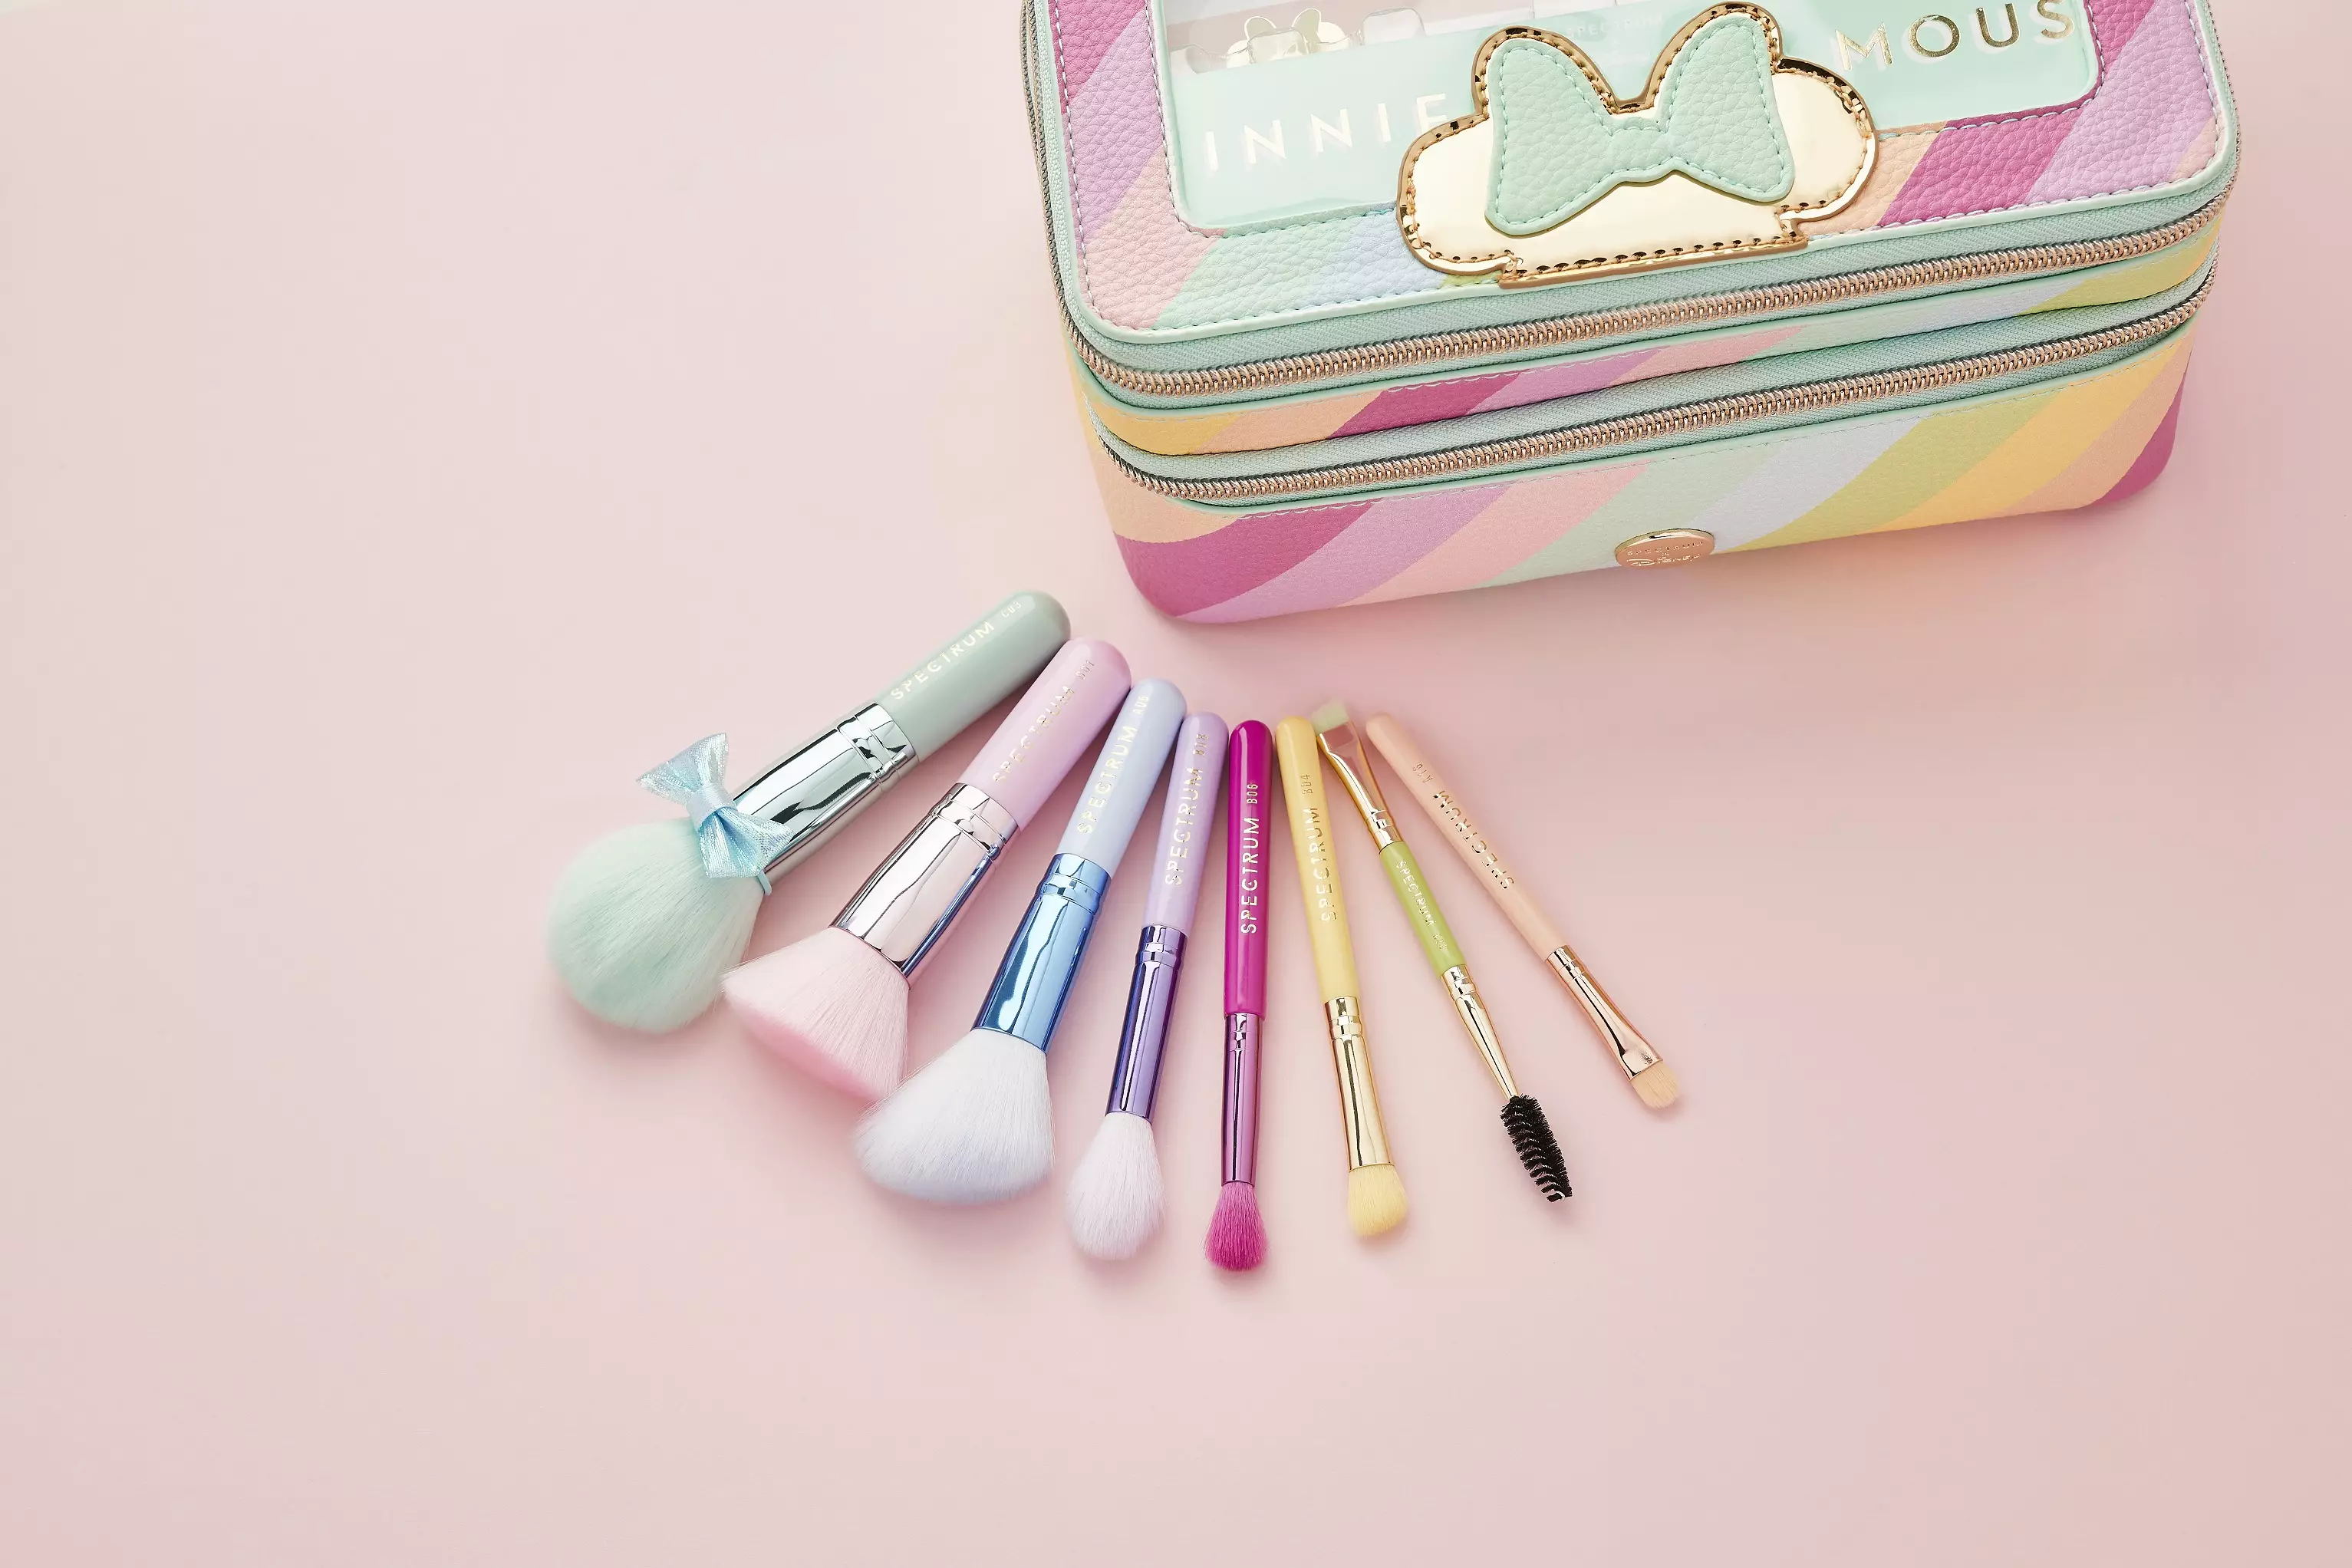 Housed in a pastel-rainbow print carry case, the set is themed around Minnie's sweet and fun-loving nature (